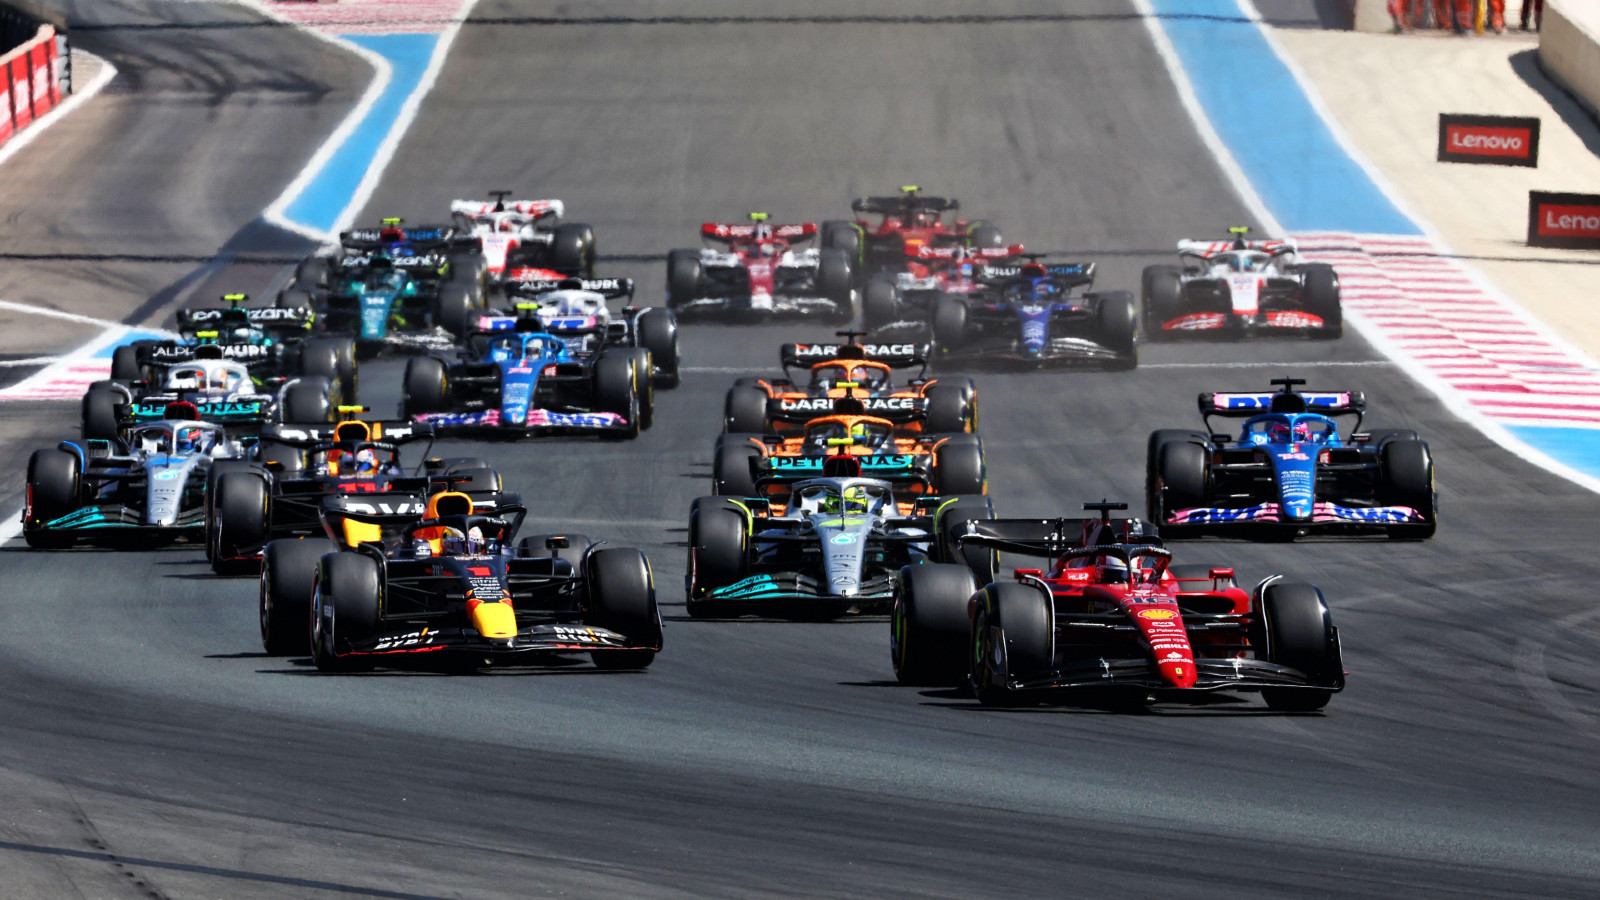 Ferrari's Charles Leclerc leads Red Bull's Max Verstappen into Turn 1 of the French Grand Prix. Paul Ricard, July 2022. results